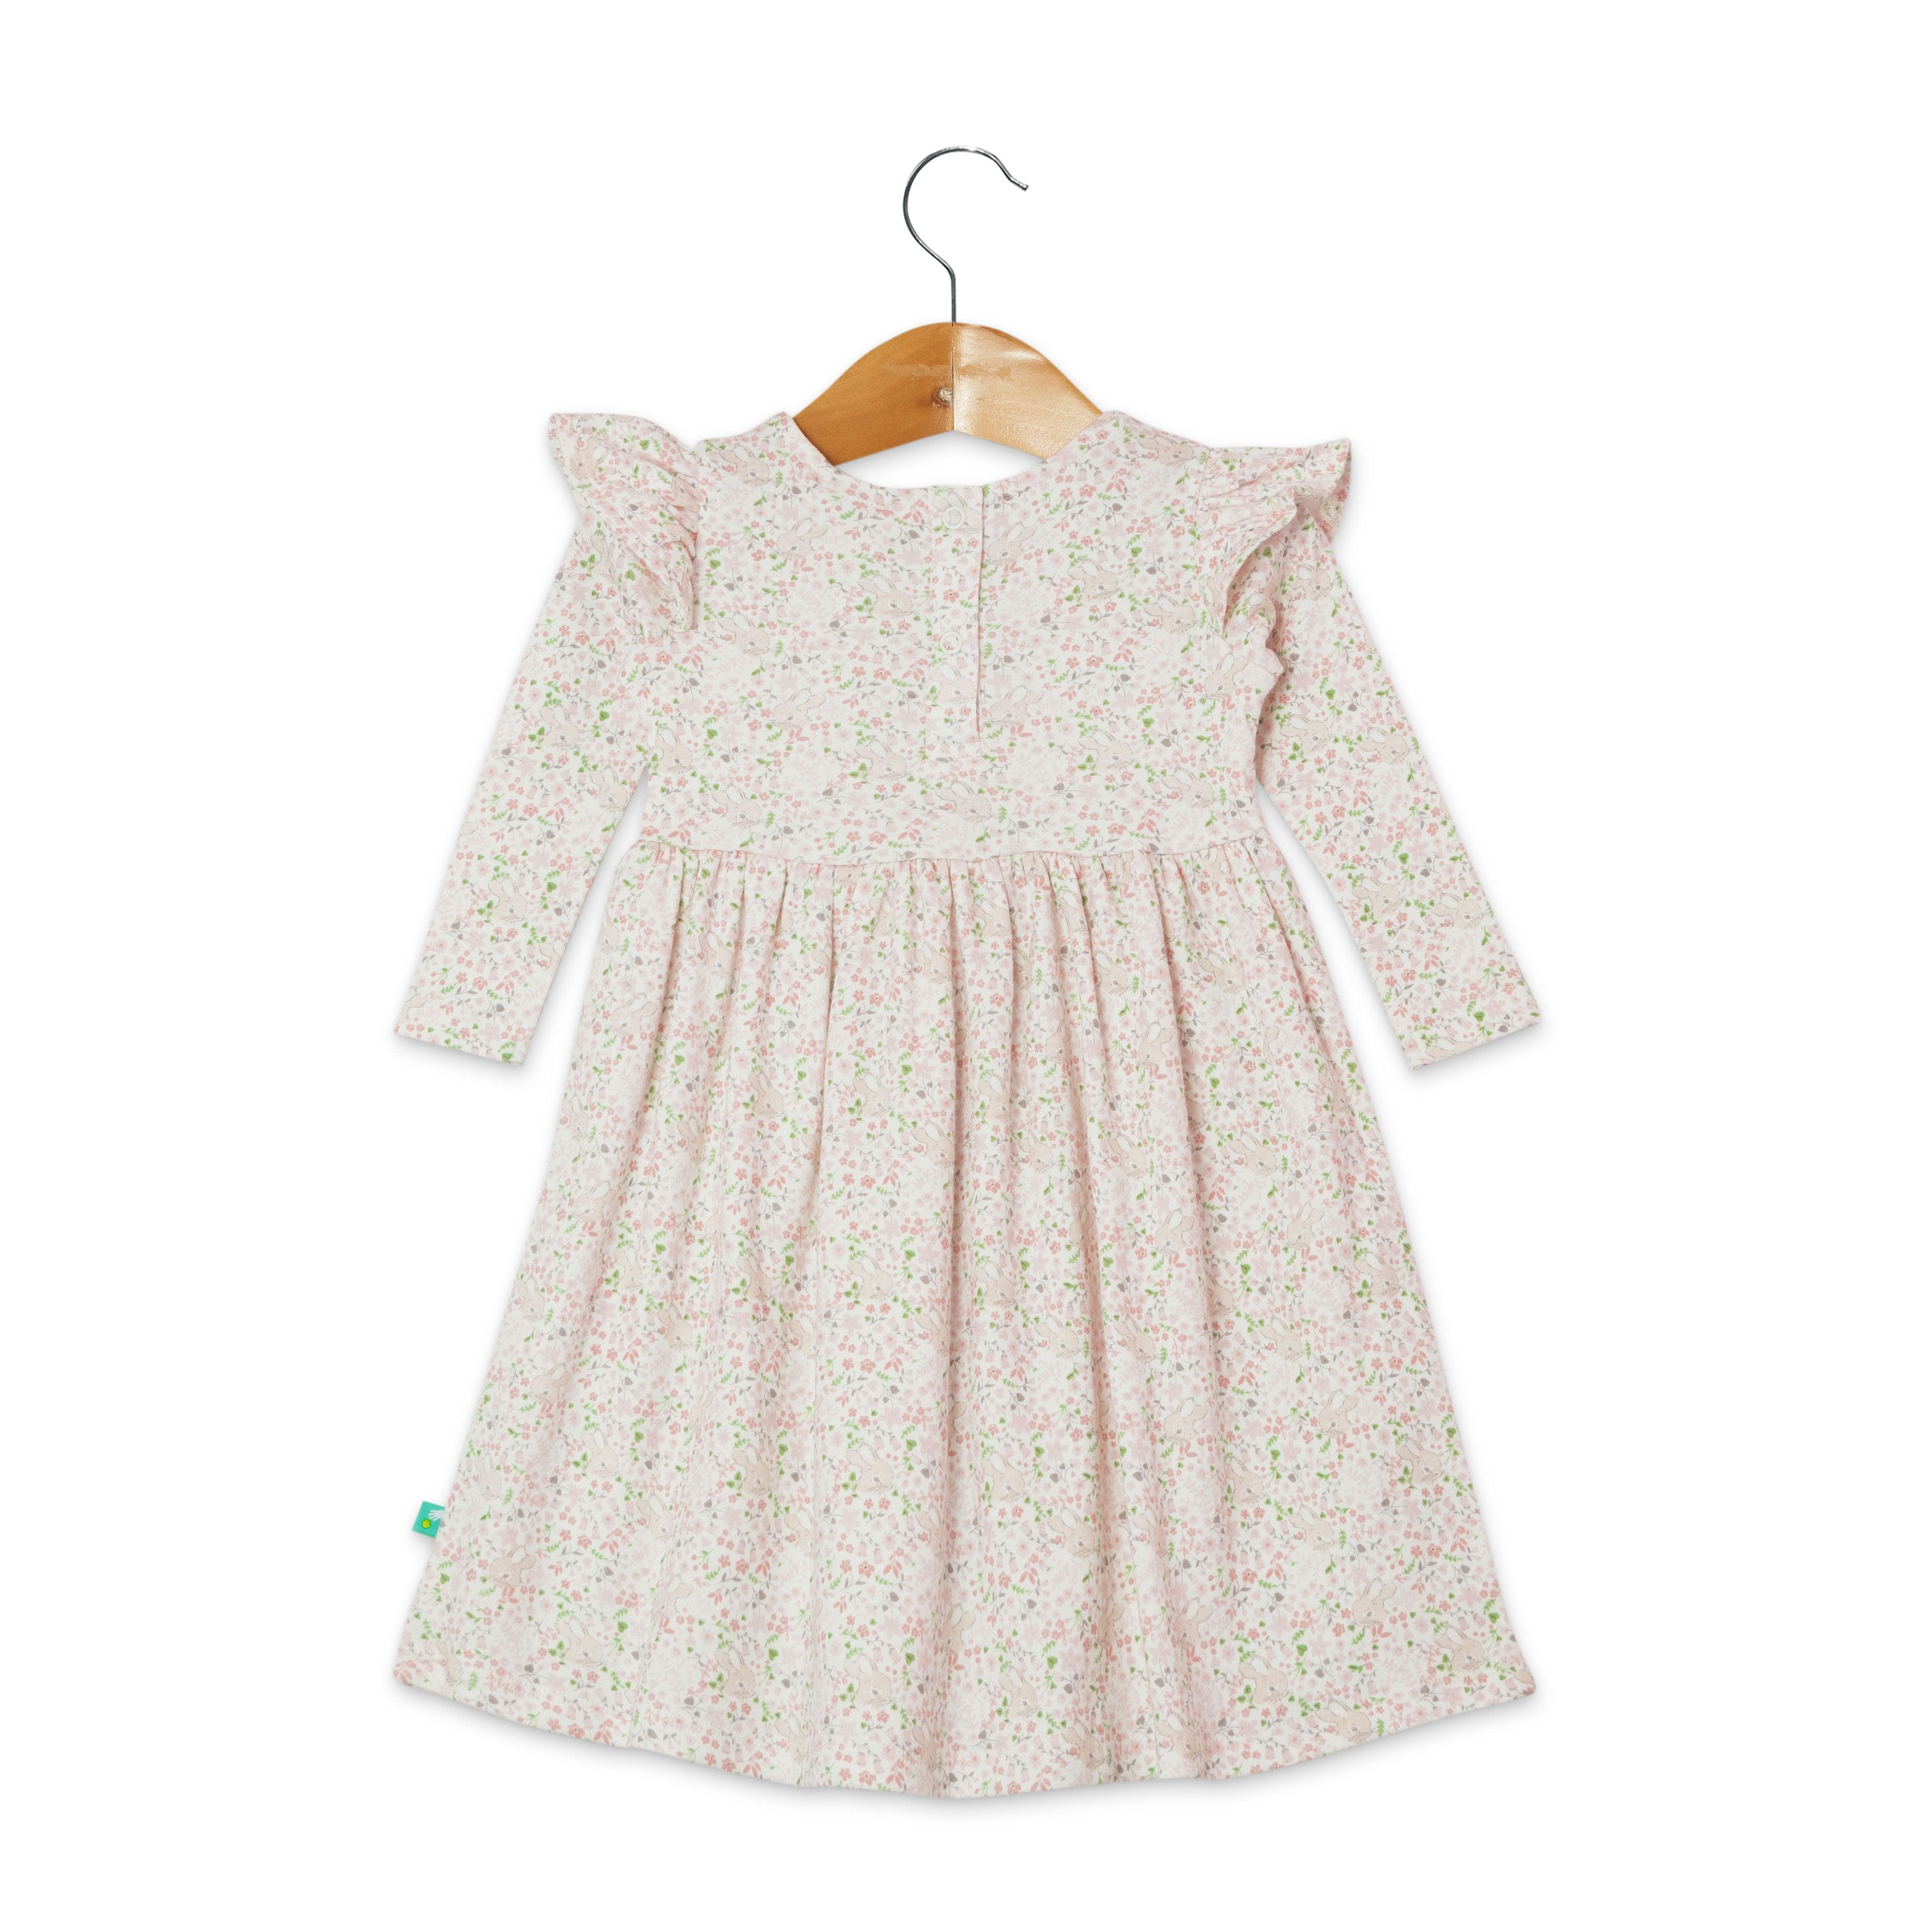 Baby Girls All Over Printed Casual Dress - Off White - Juscubs